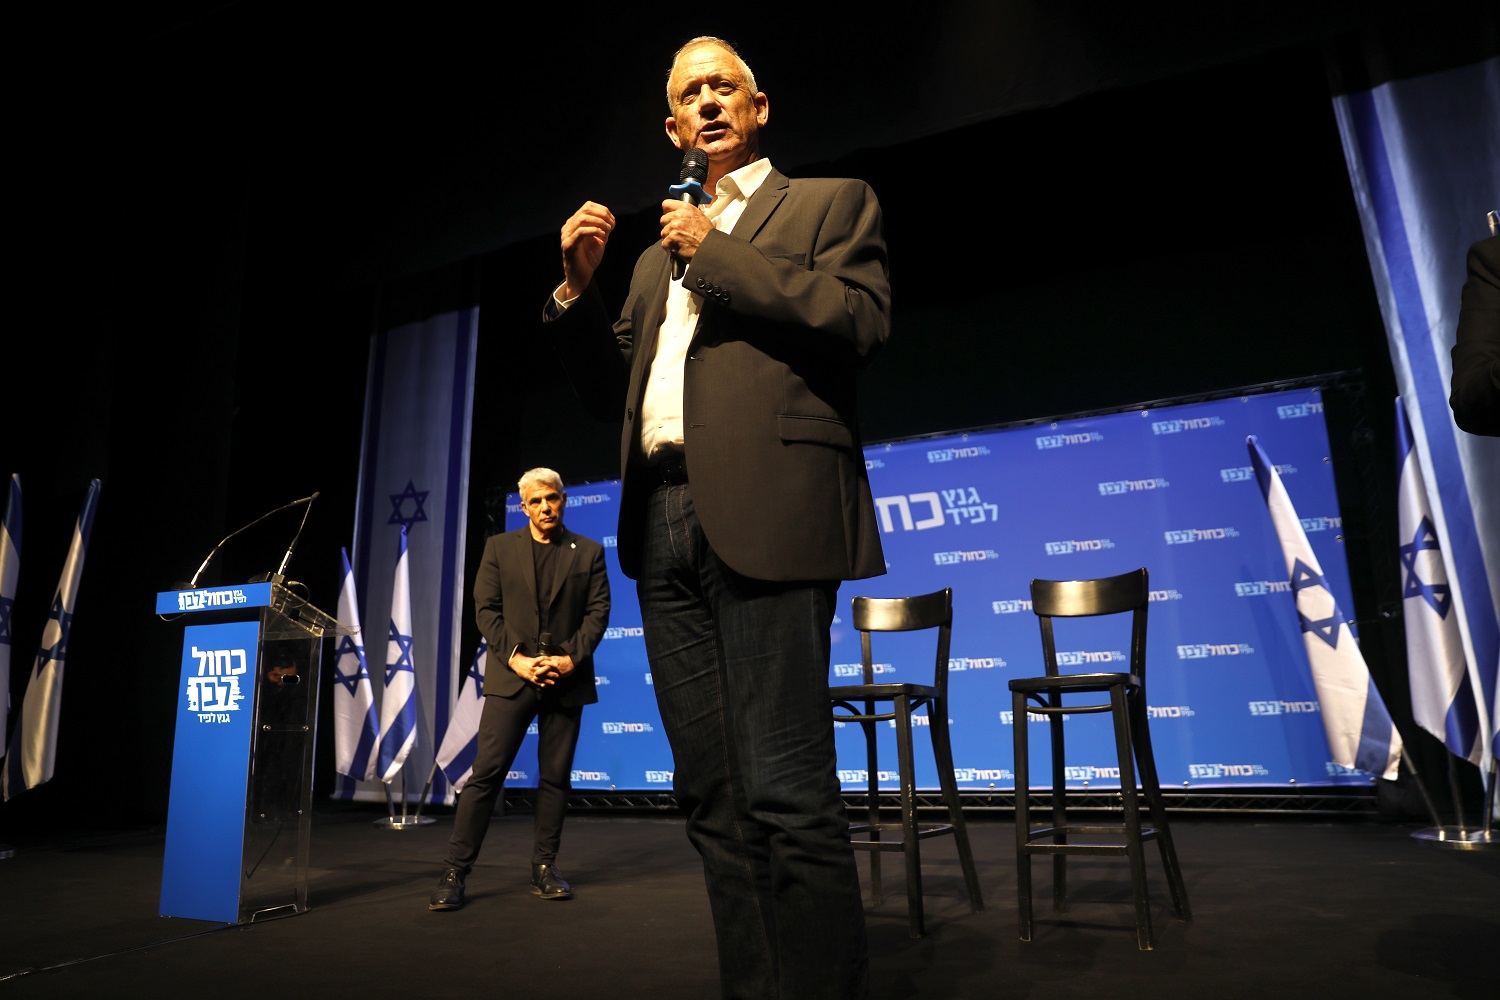 Yair Lapid (left) looks on during a speech by Benny Gantz in Beersheva in March 2019 (AFP) 